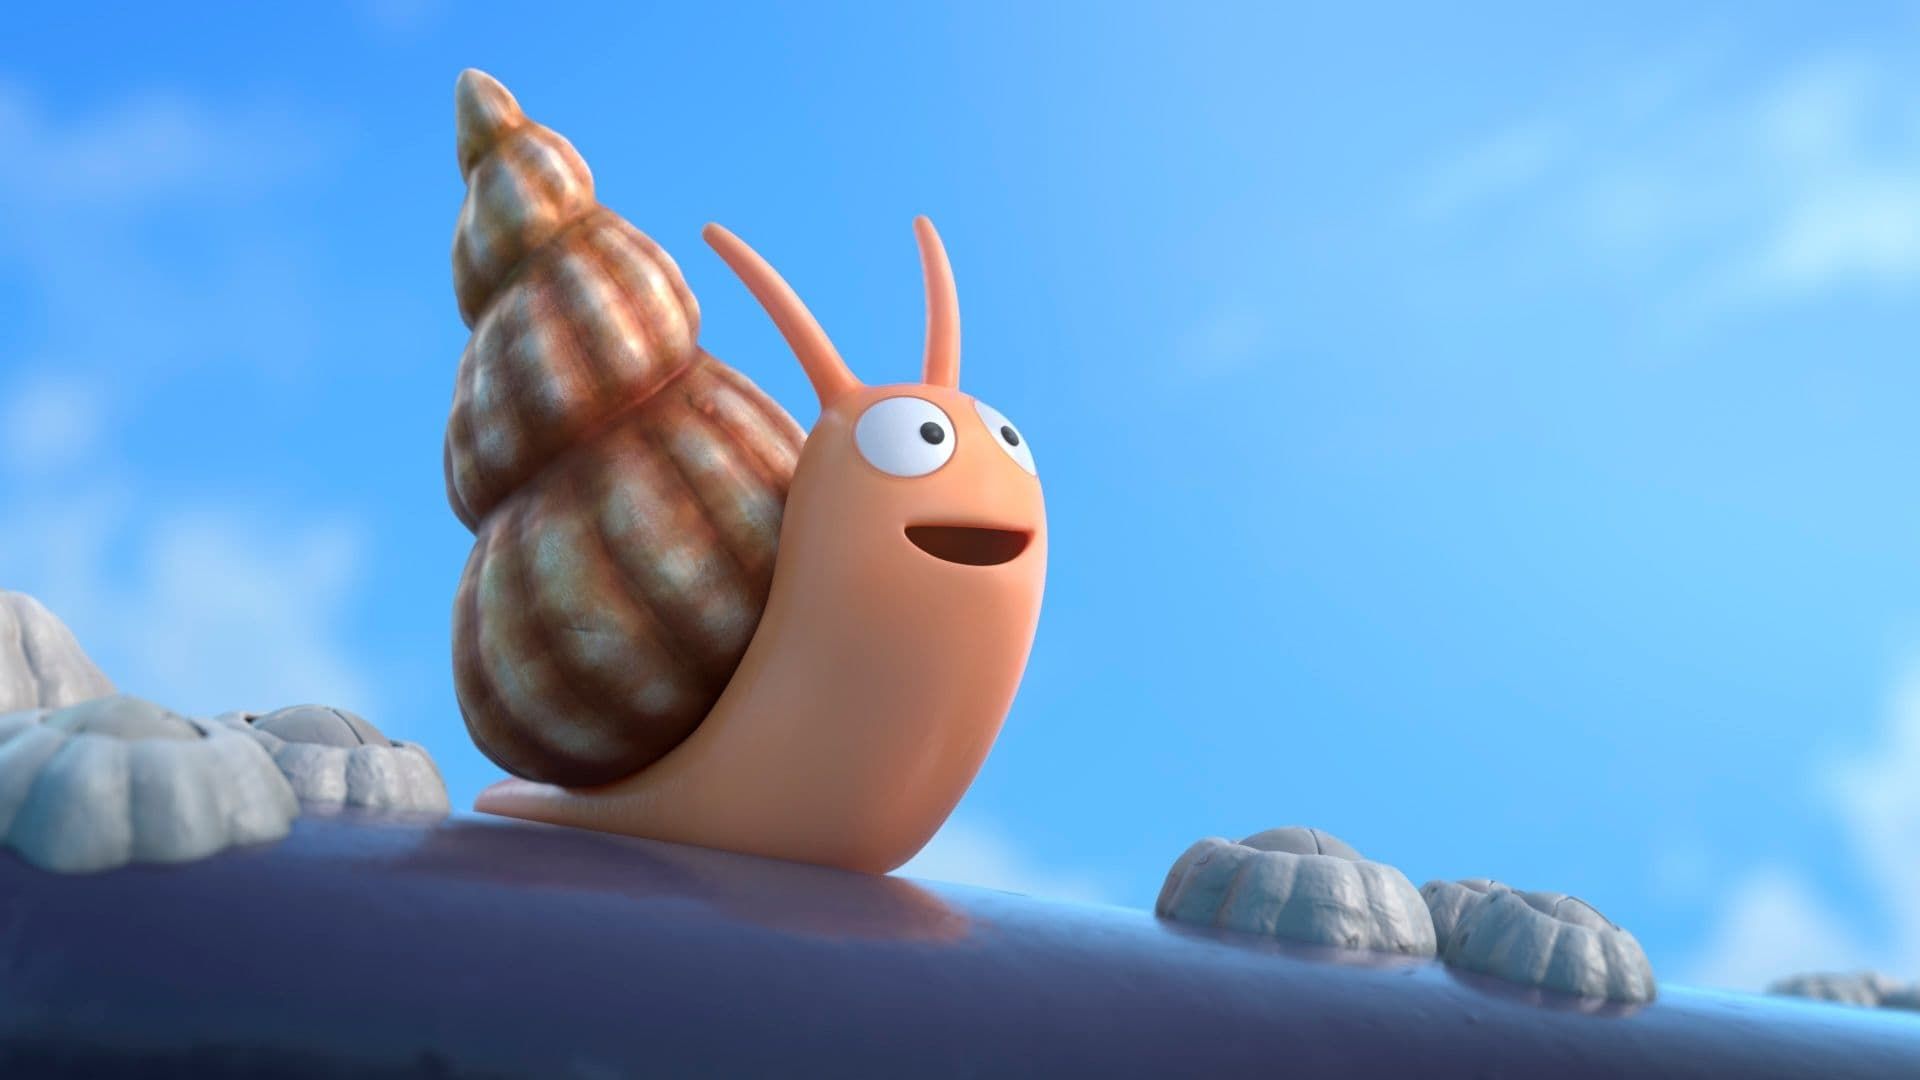 The Snail and the Whale background